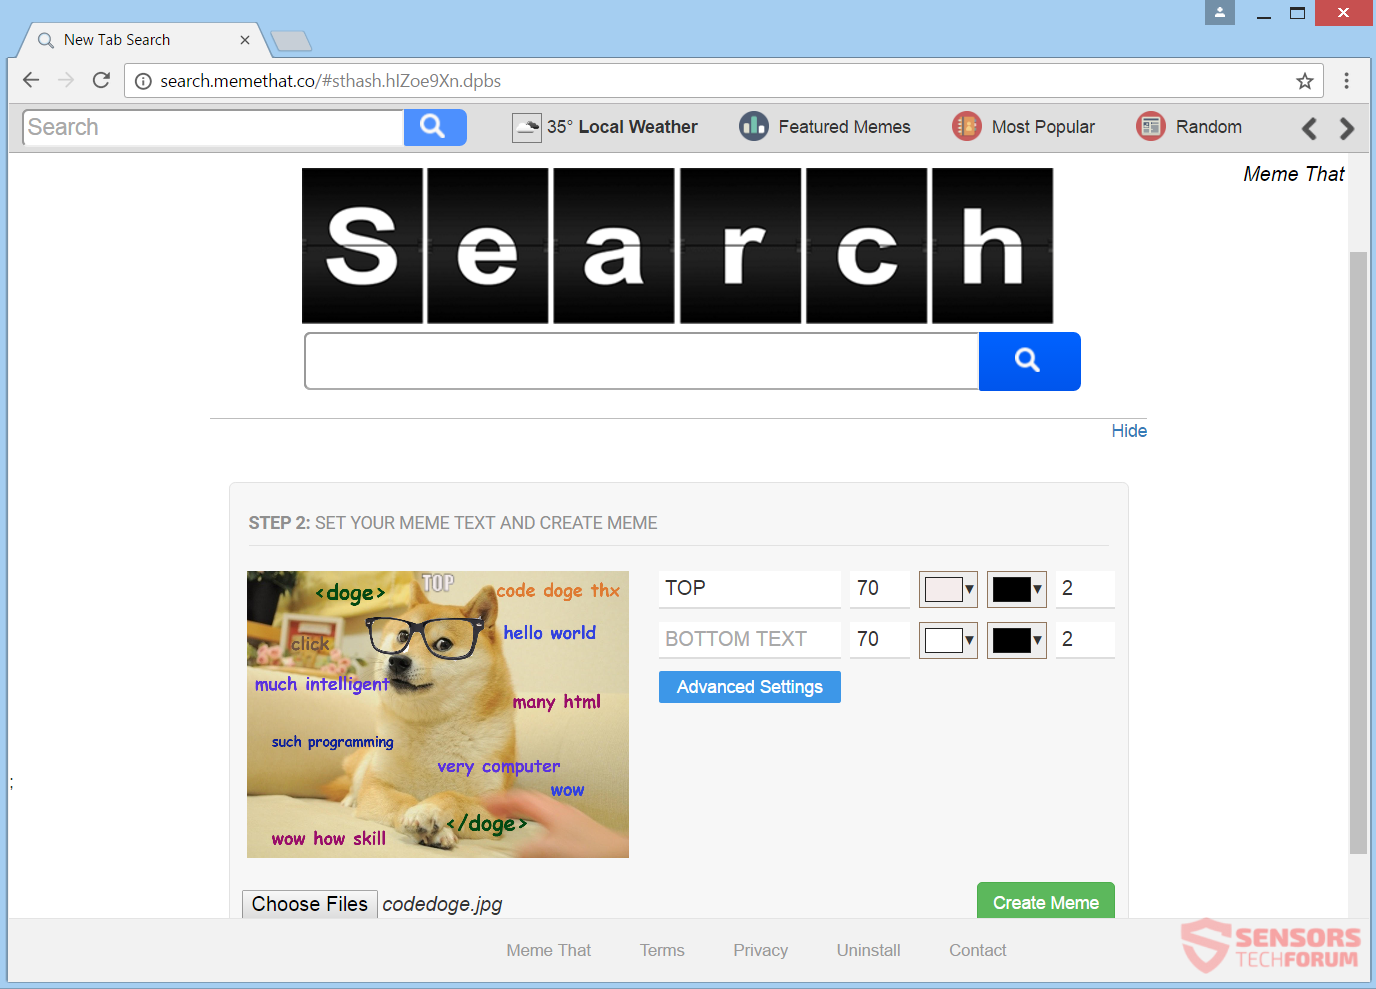 stf-search-memethat-co-meme-that-browser-hijacker-redirect-main-site-page